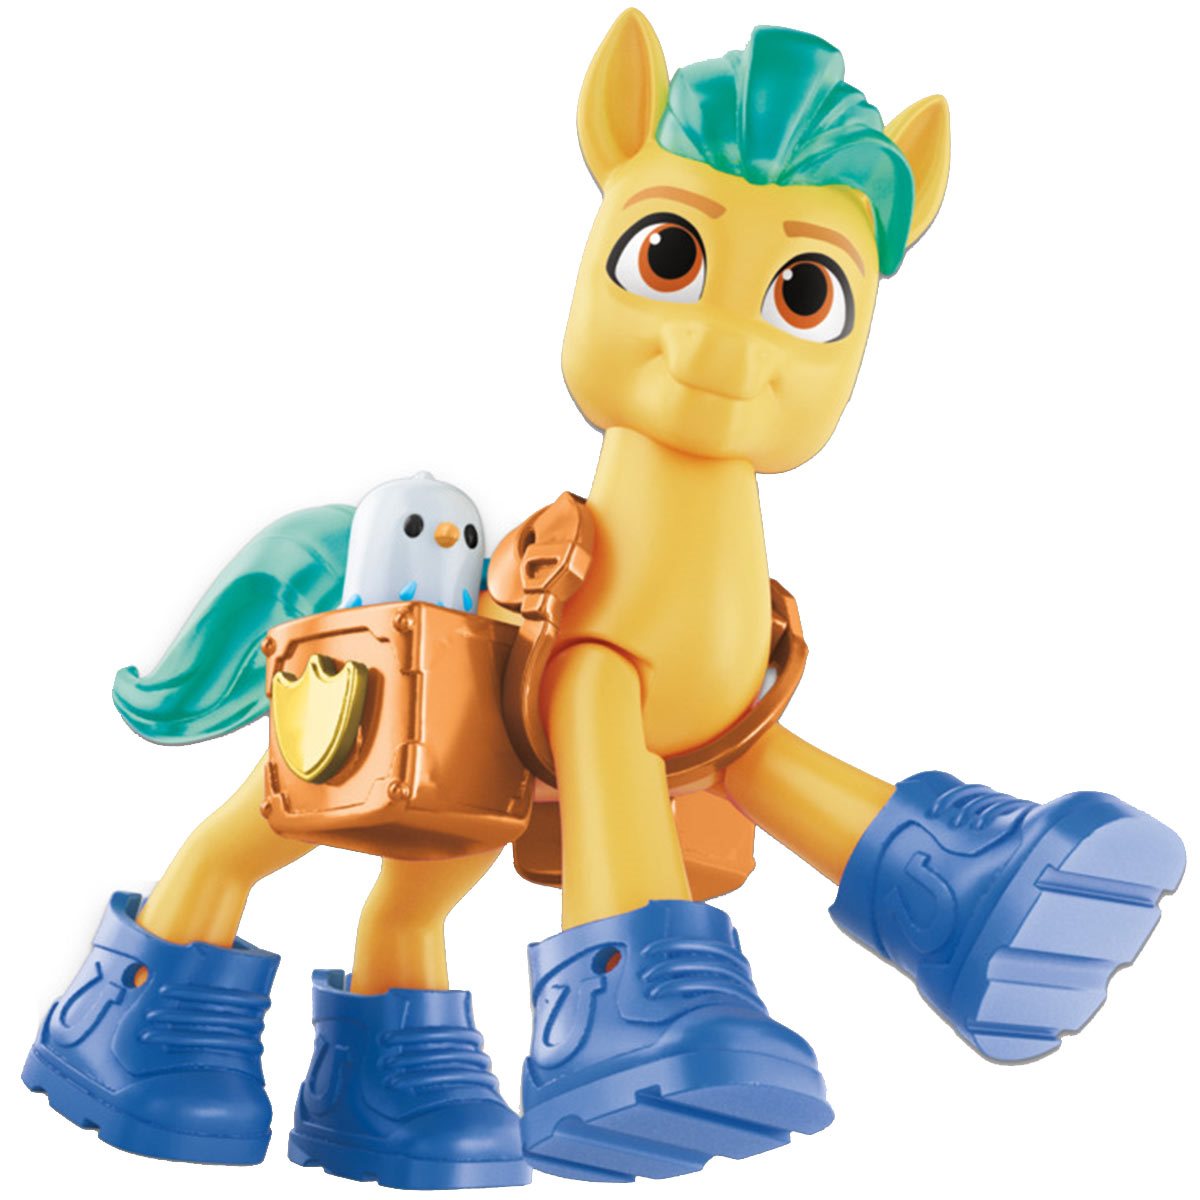 Little Pony New Generation Character  New Generation Little Pony Toys -  Baby Doll - Aliexpress